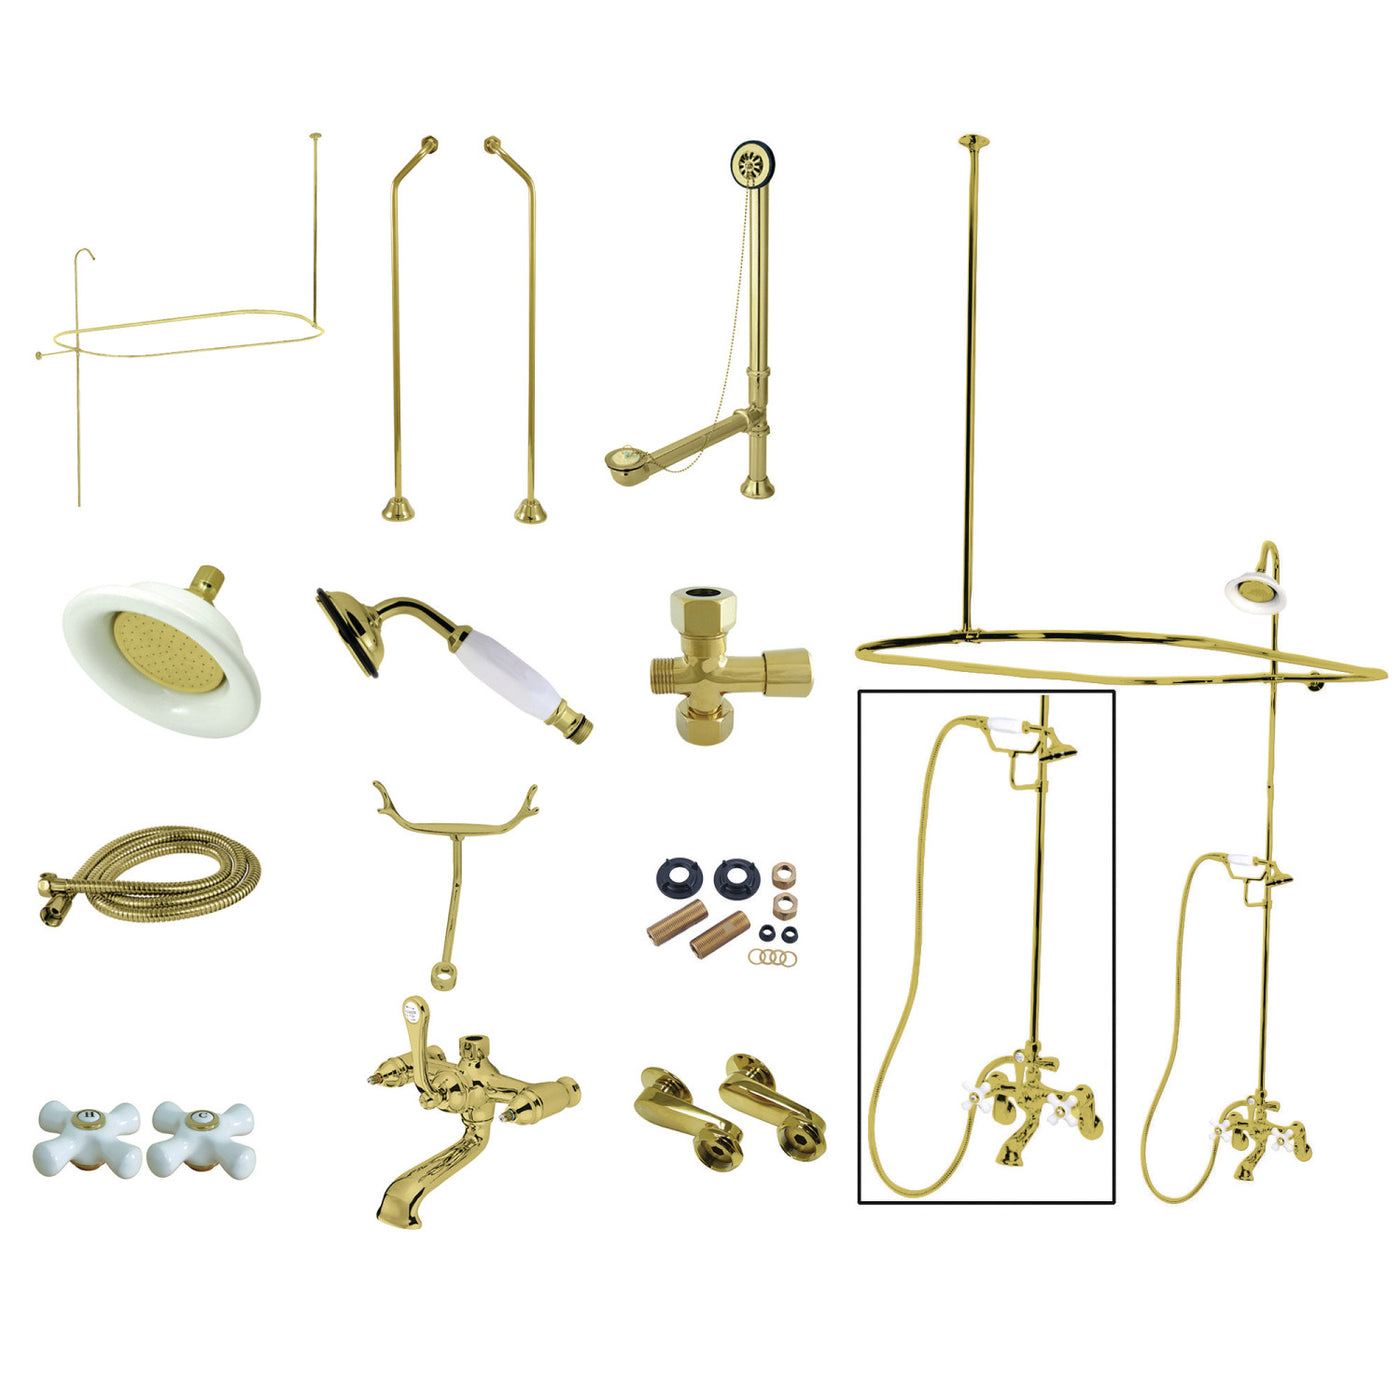 Elements of Design EDK1182PX Clawfoot Tub Faucet Package with Shower Enclosure, Polished Brass